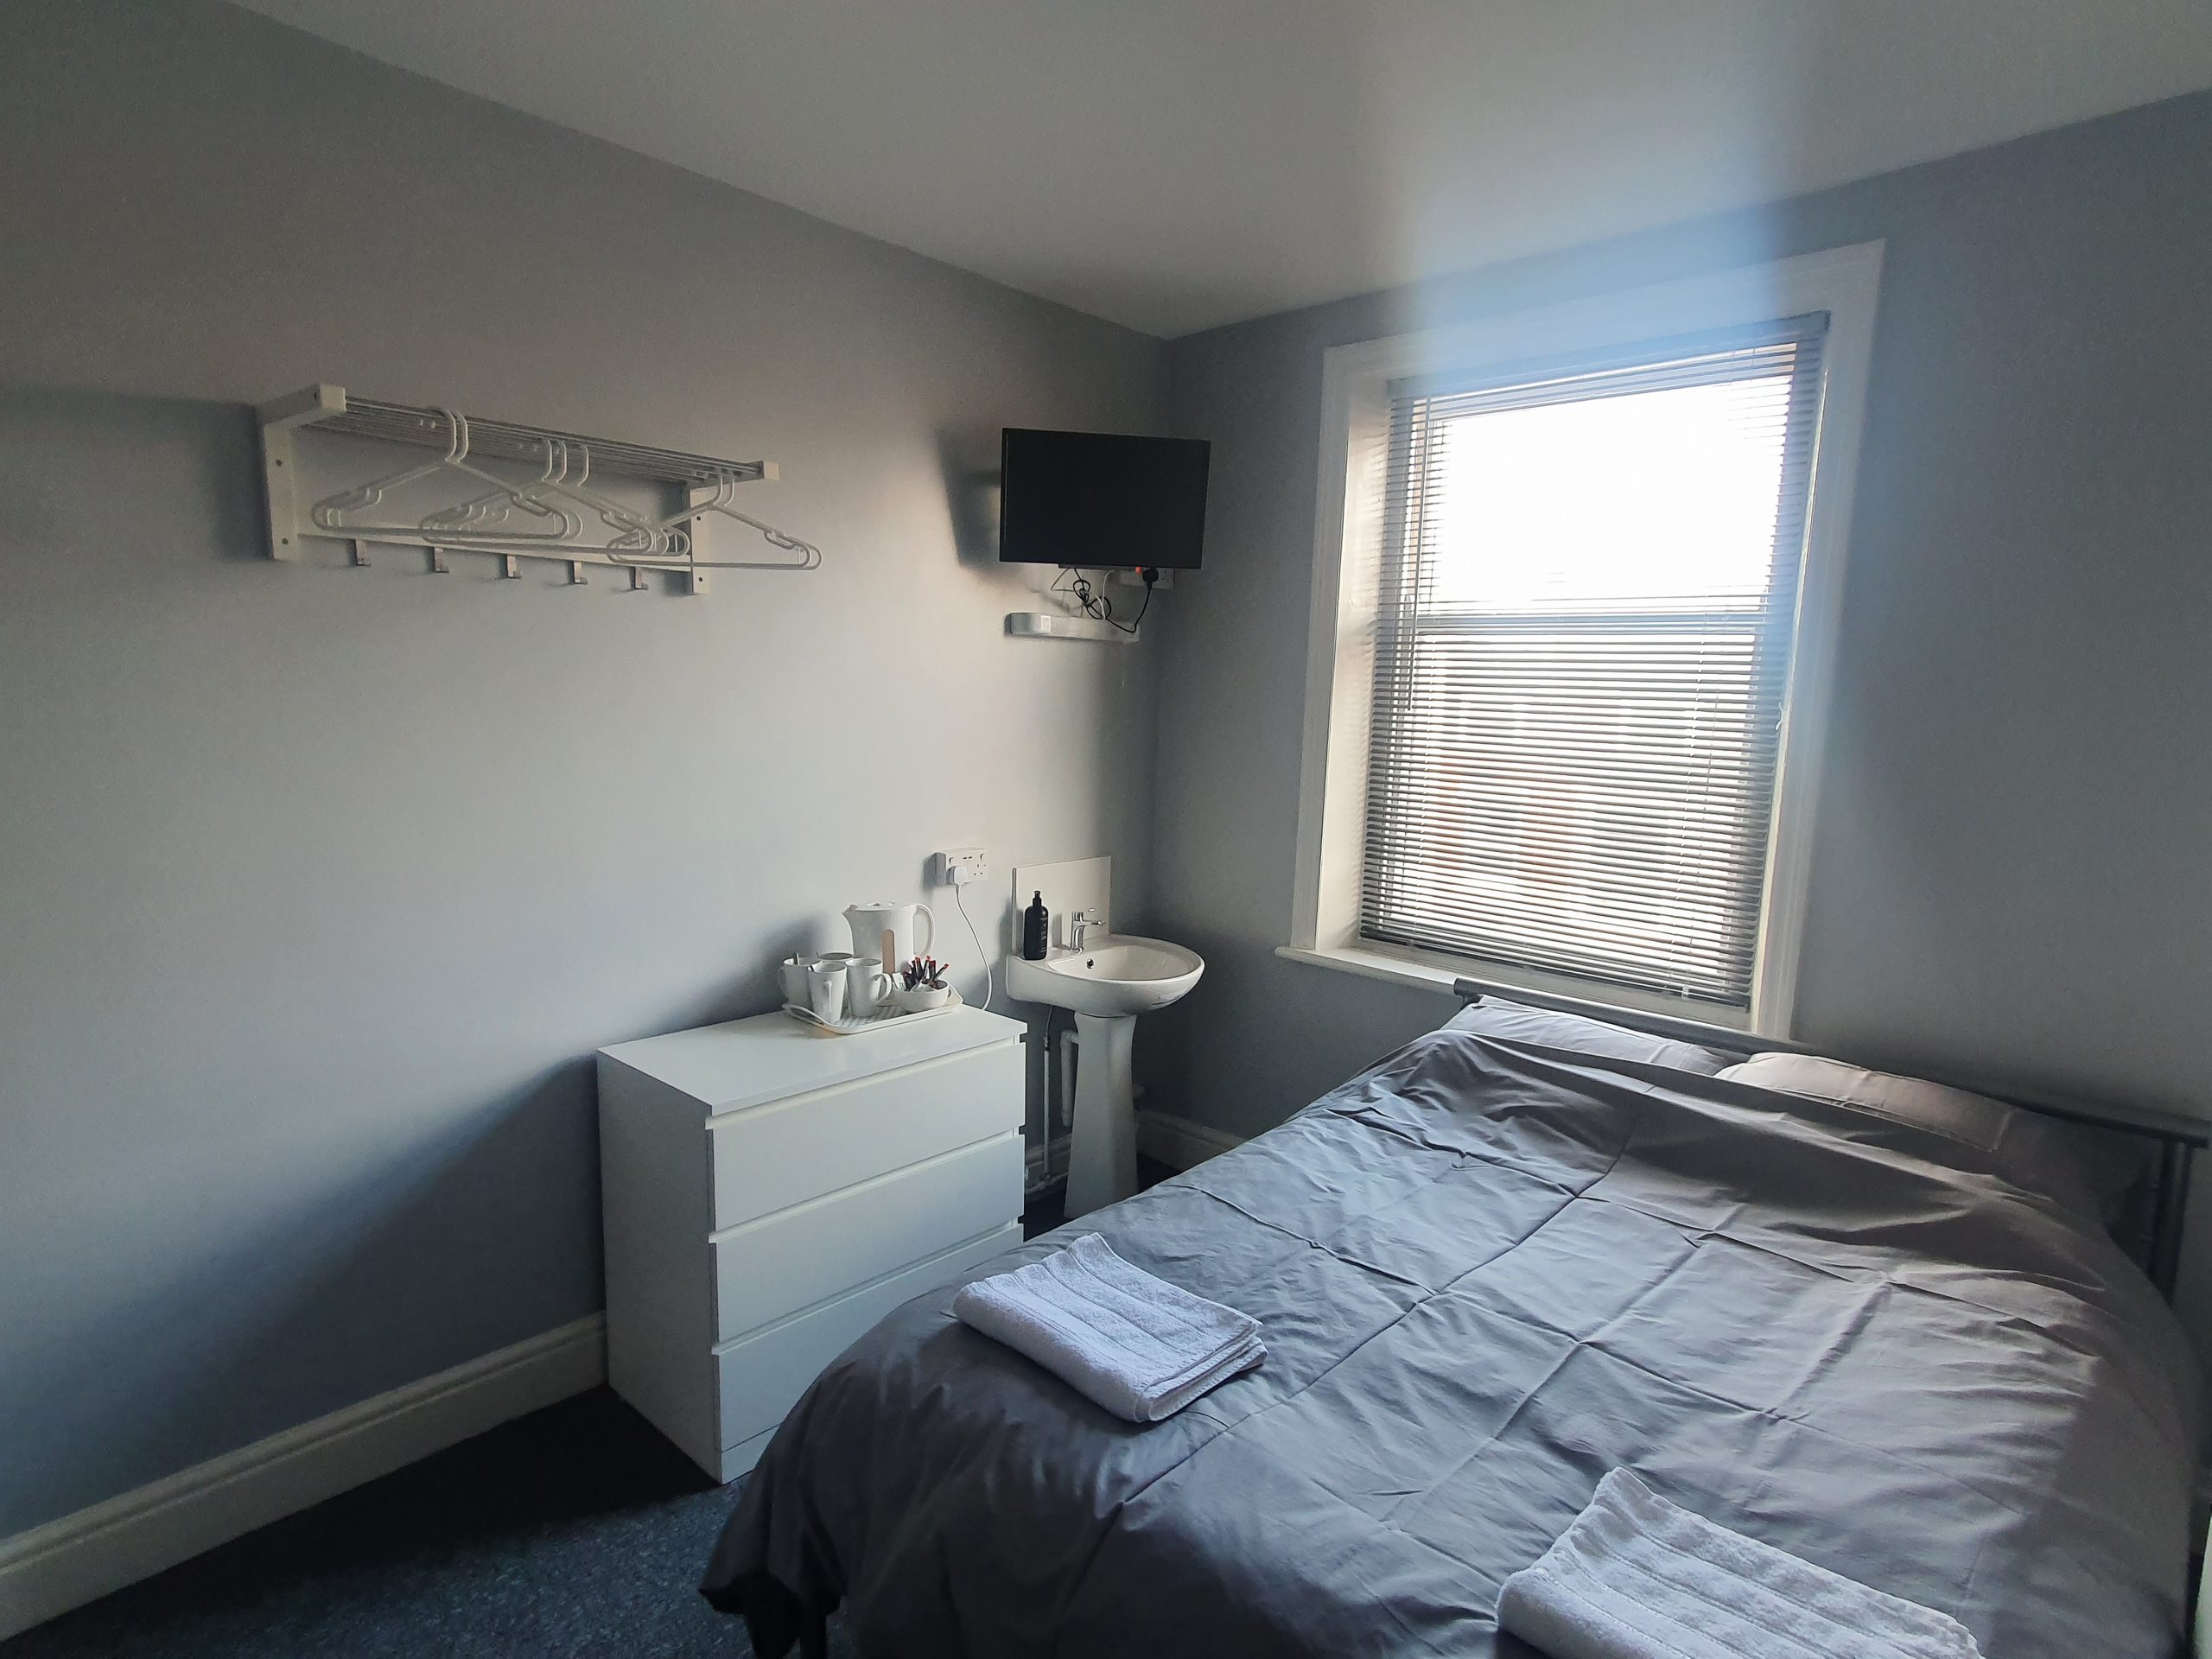 Contractors Accommodation Blackpool beds for builders